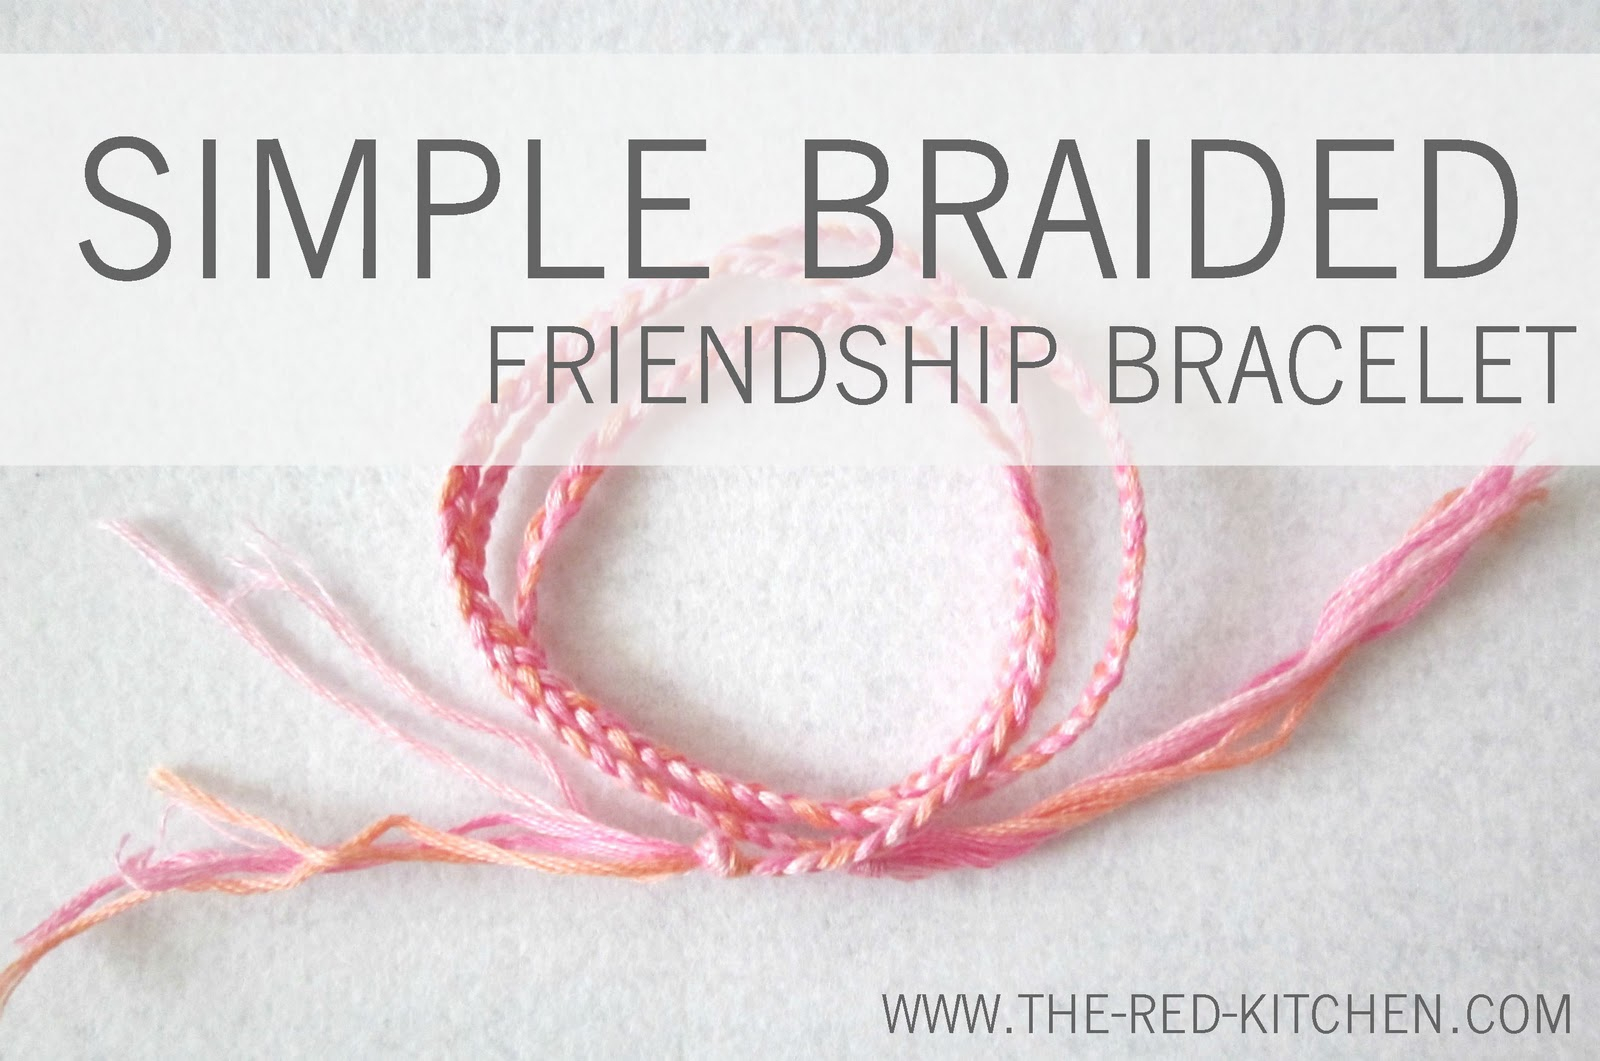 Embroidery Floss Friendship Bracelet Patterns The Red Kitchen Simple Braided Friendship Bracelet A Tutorial In